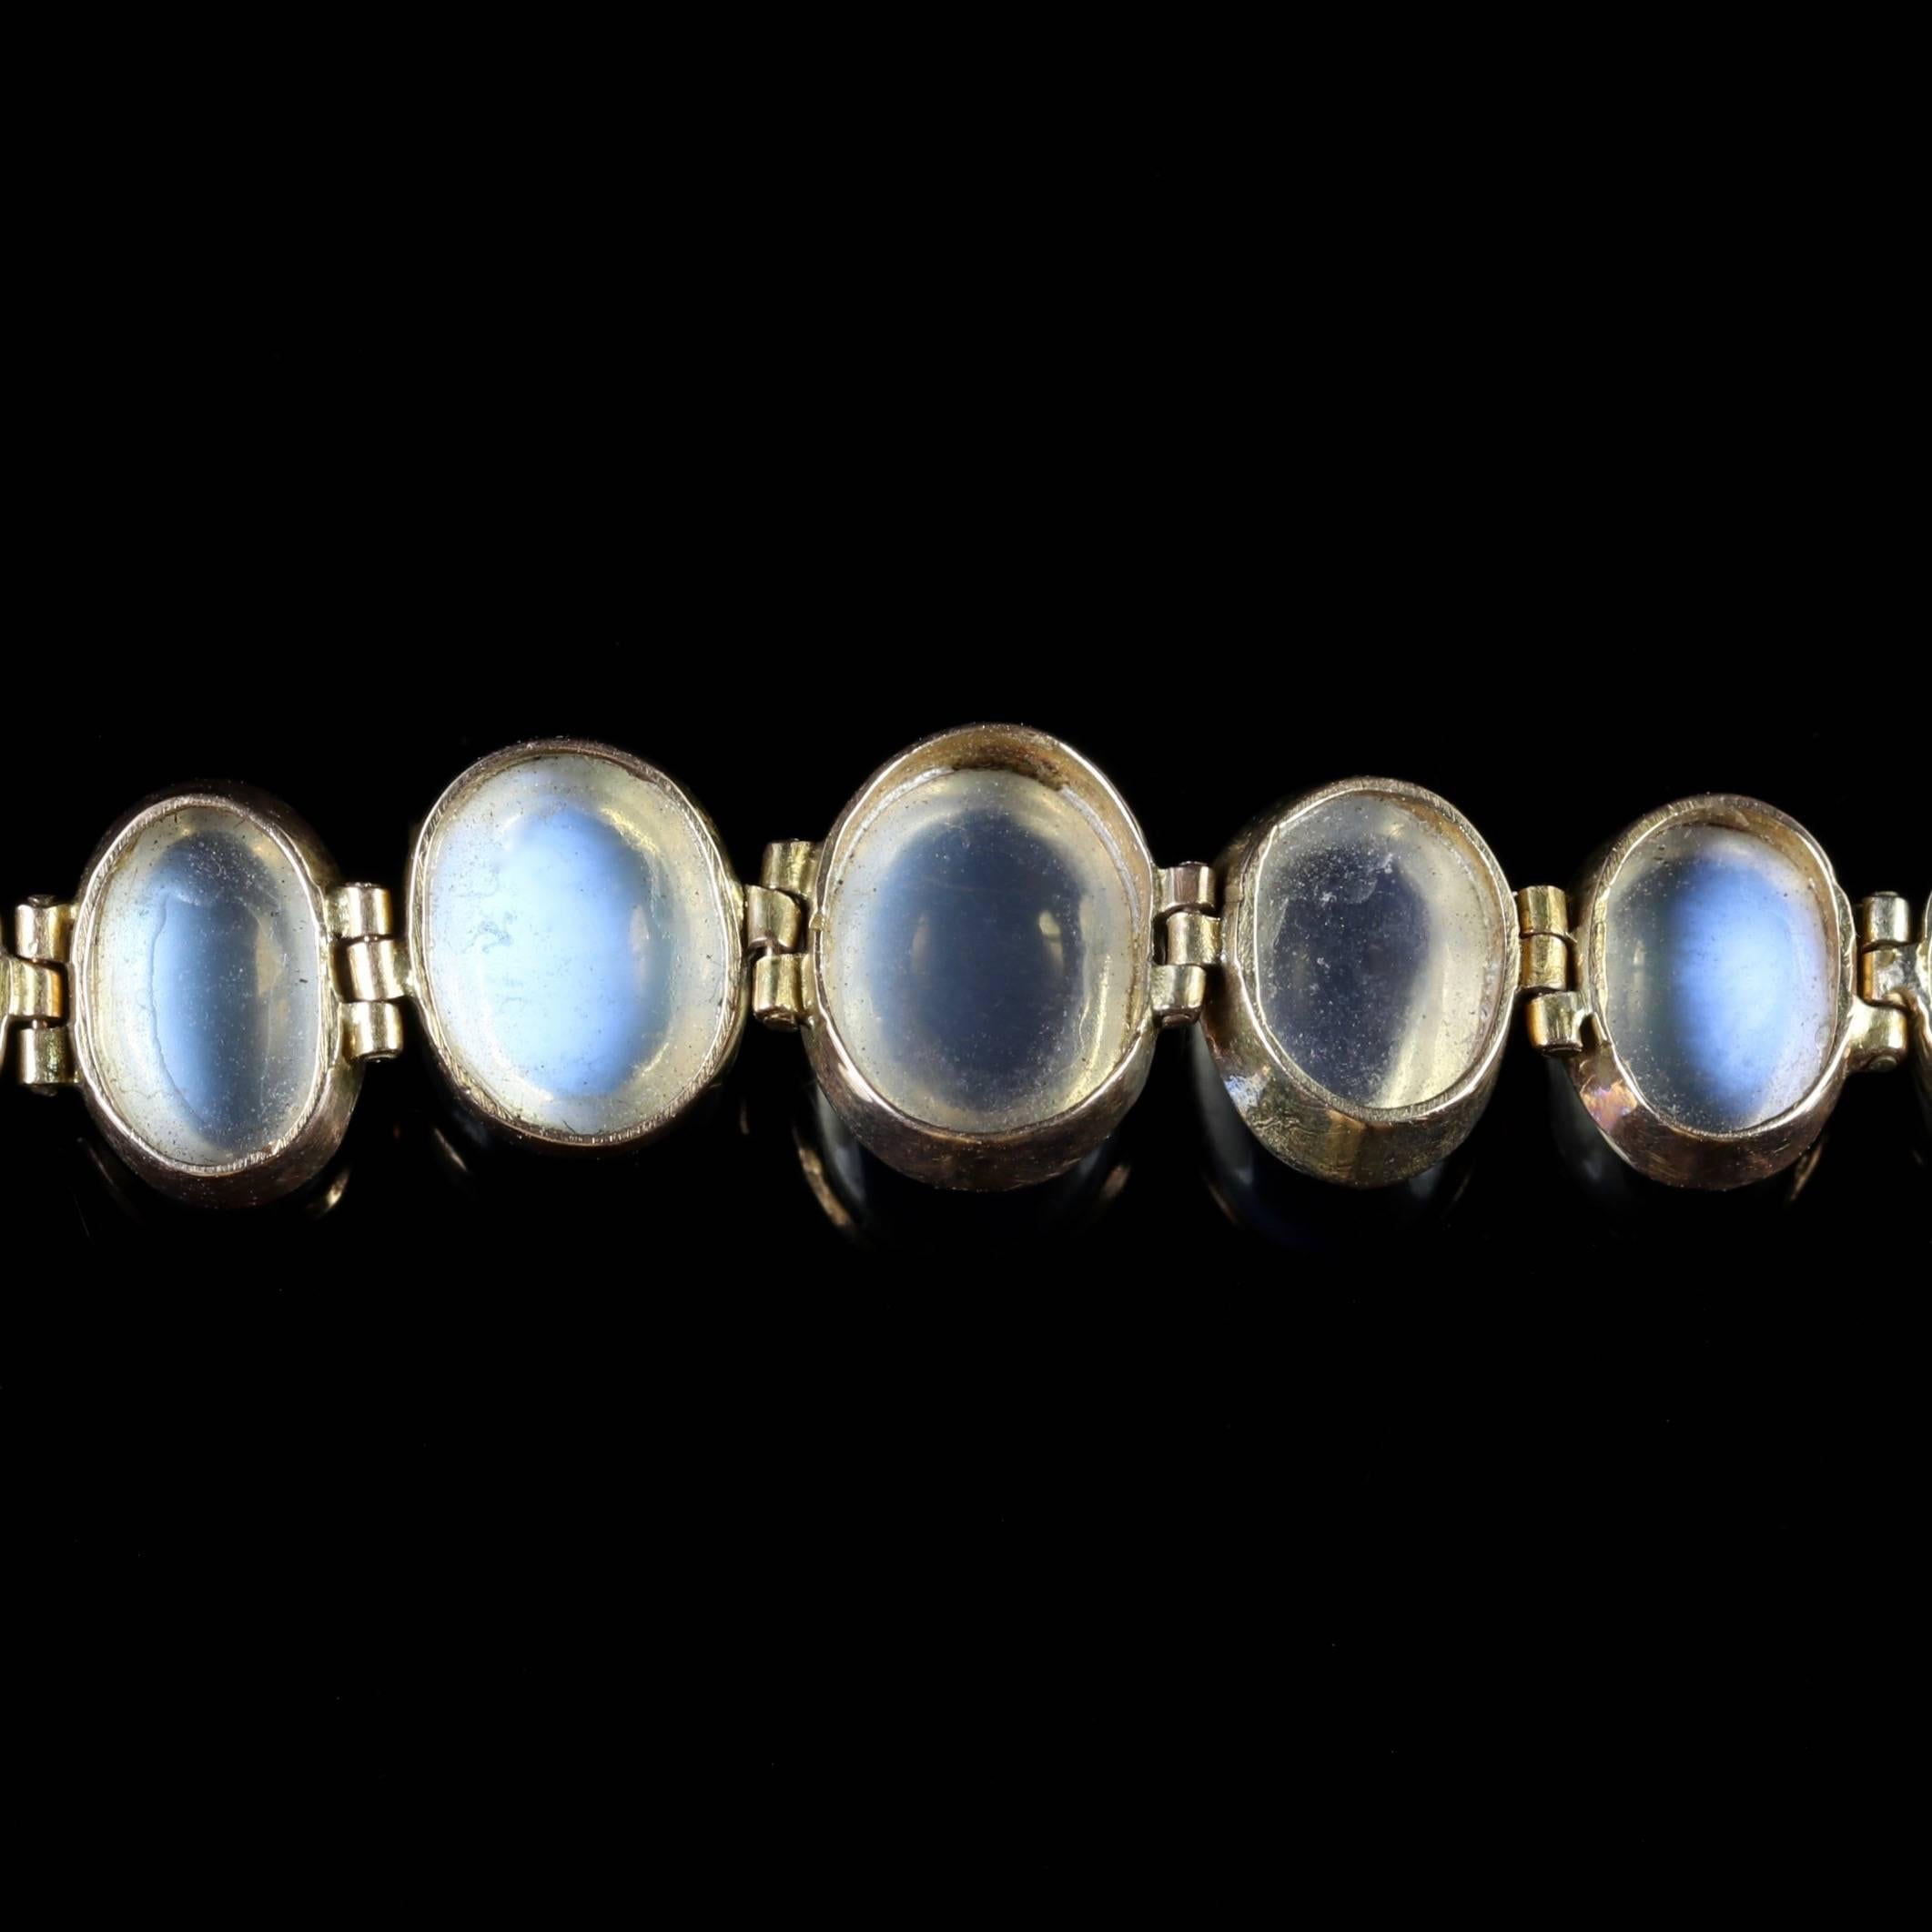 This fabulous 9ct Yellow Gold antique Victorian Moonstone bracelet is Circa 1900.

Each Moonstone has a lovely glowing mysterious blue hue, these are all original Victorian.

The beautiful Moonstone has a lovely ghostly hue, Moonstone has been a